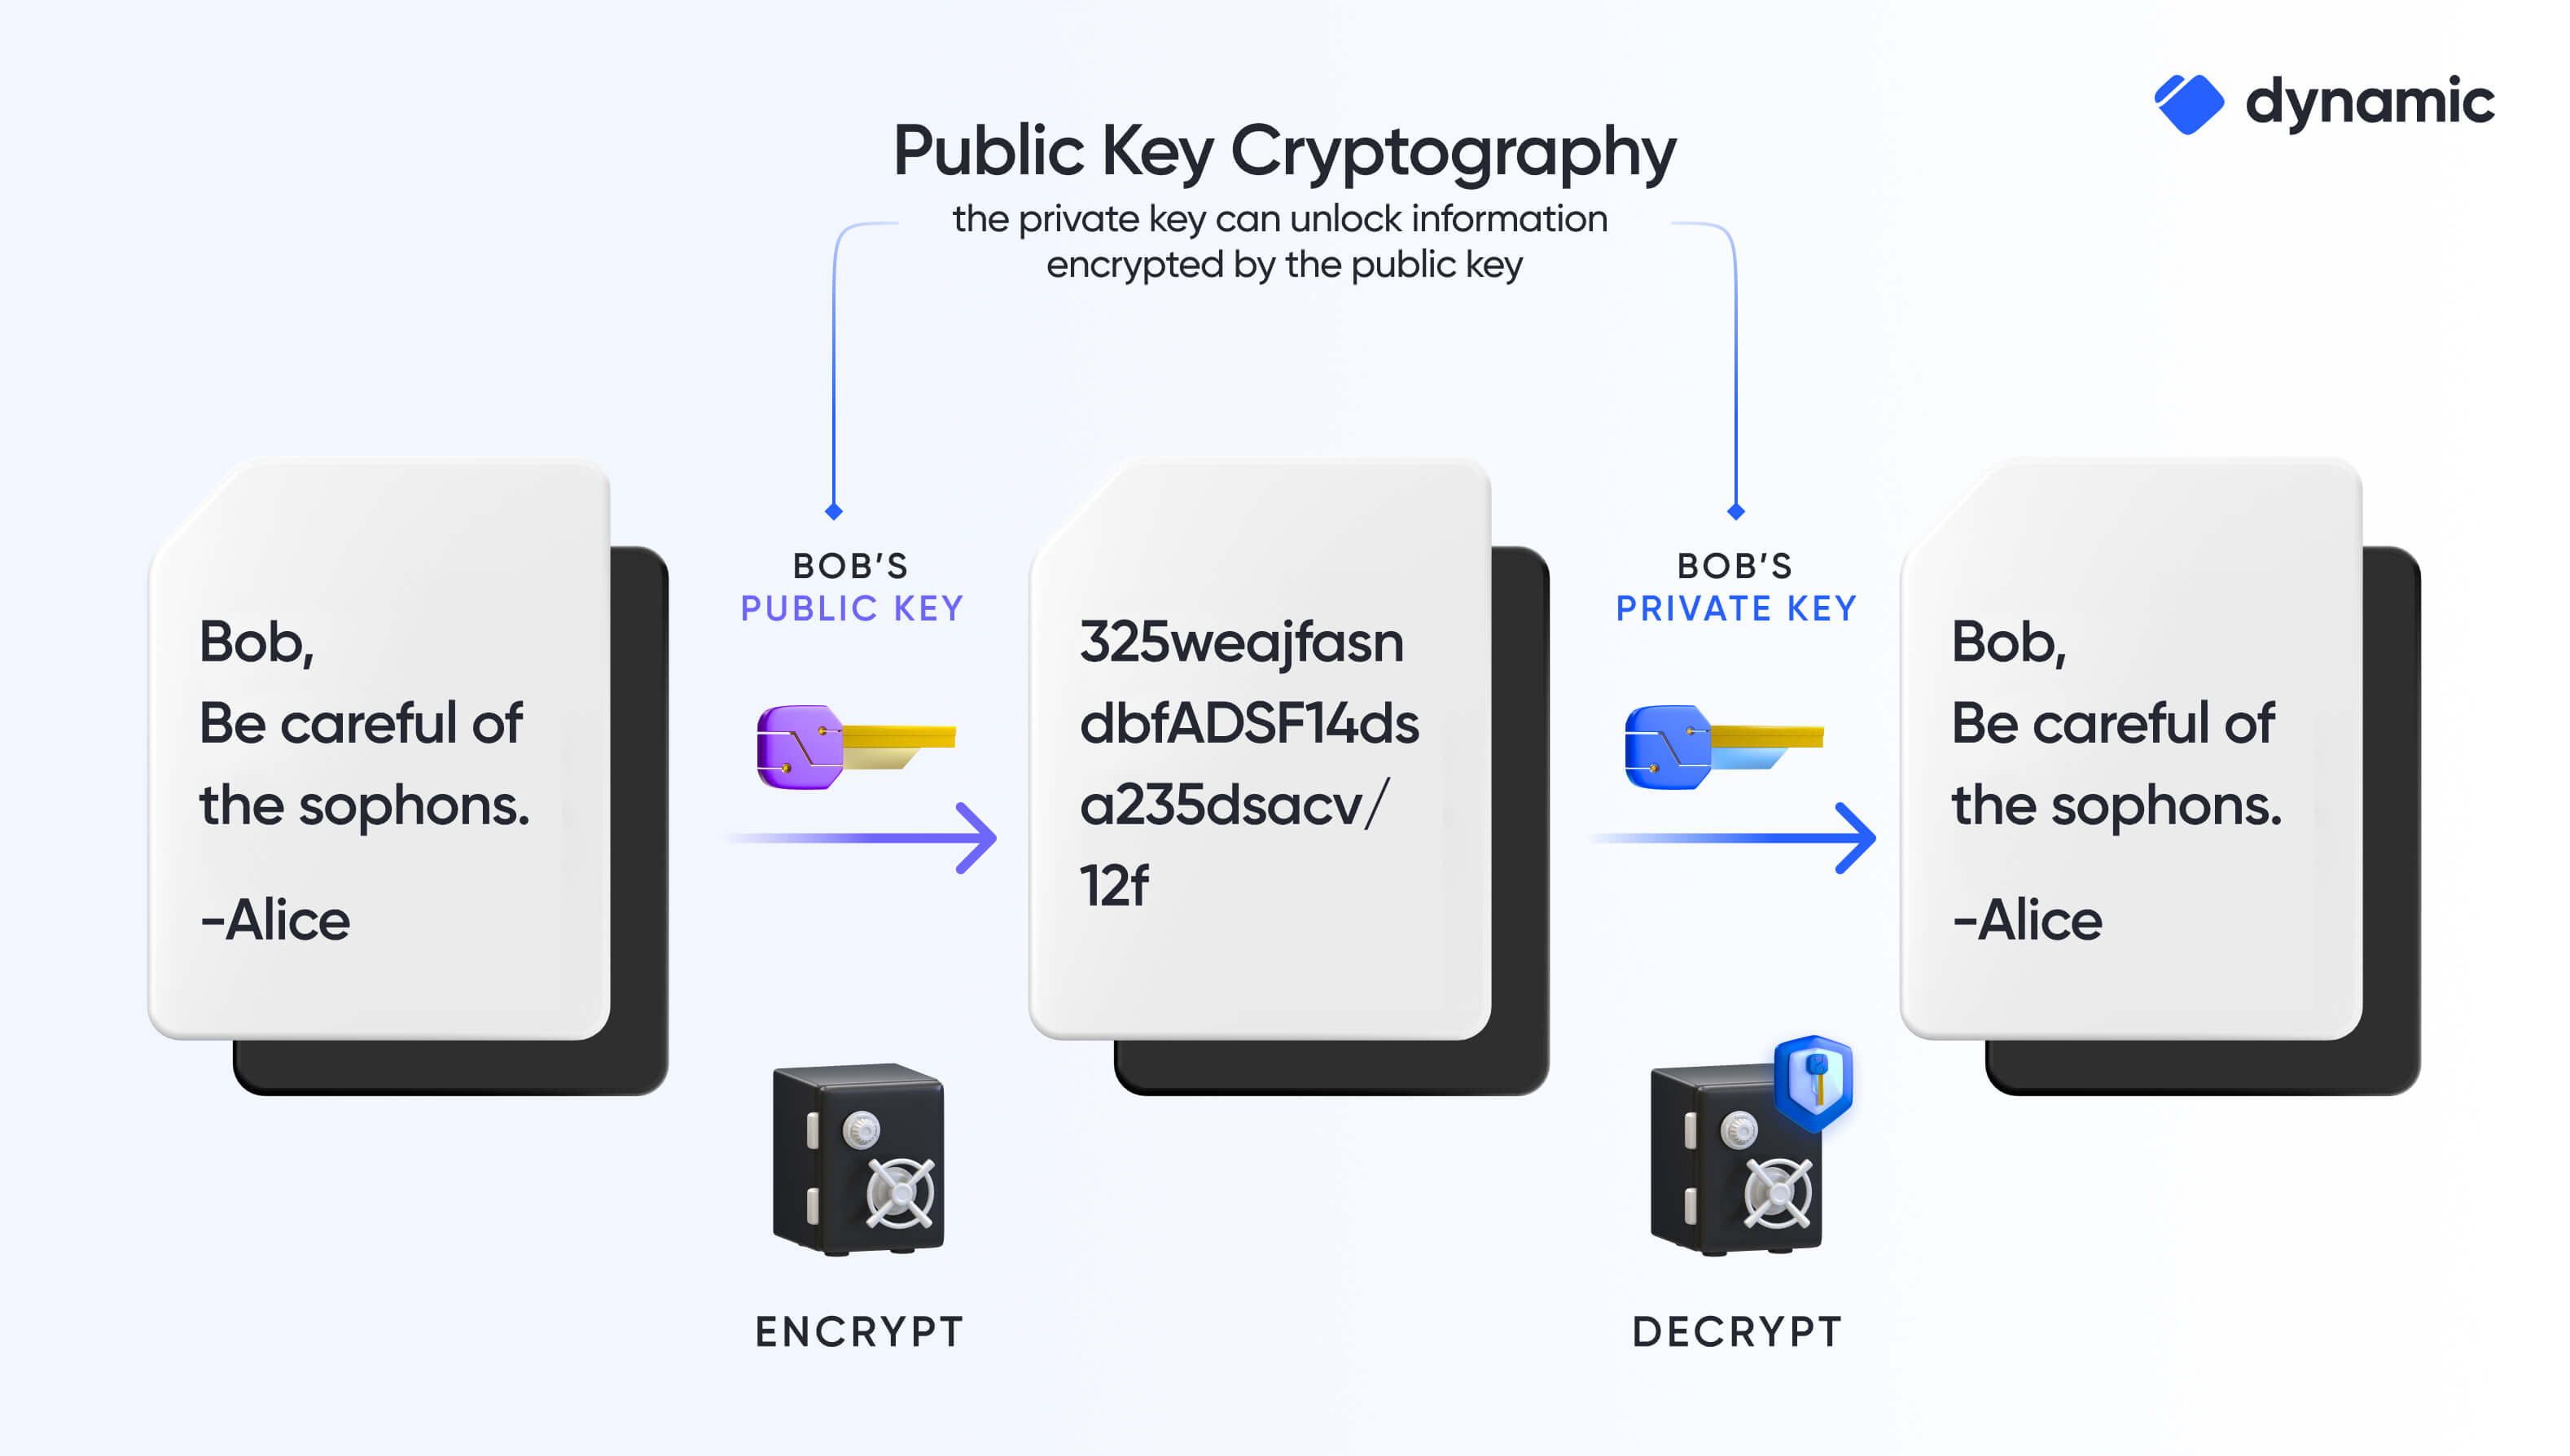 Tips for Keeping Your Private Key Wallet Secure